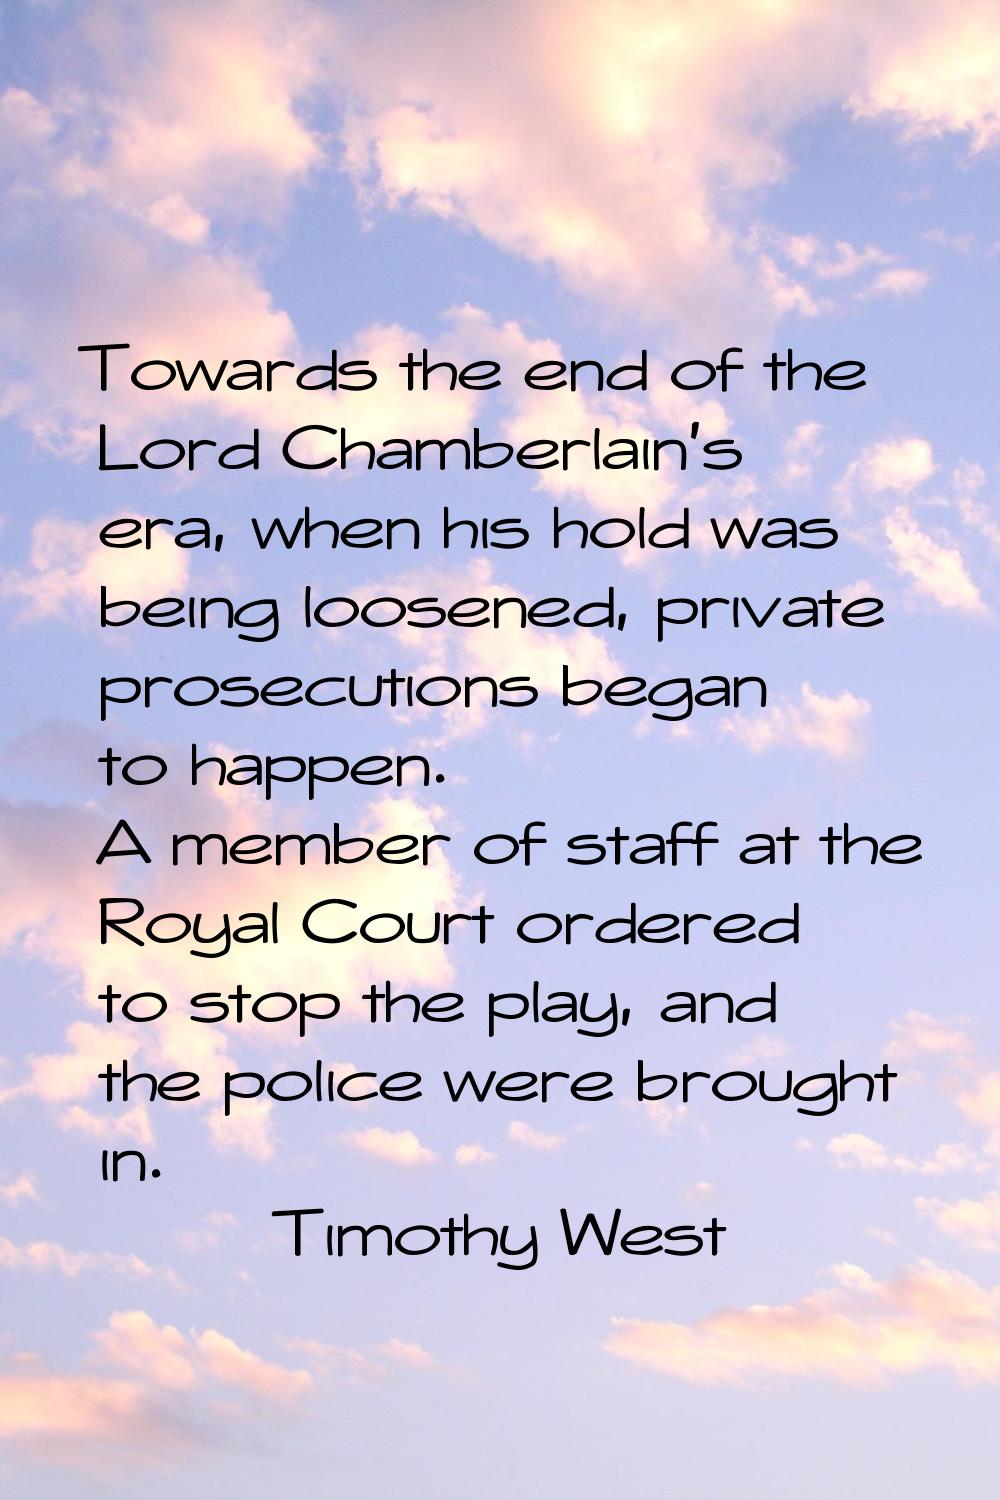 Towards the end of the Lord Chamberlain's era, when his hold was being loosened, private prosecutio